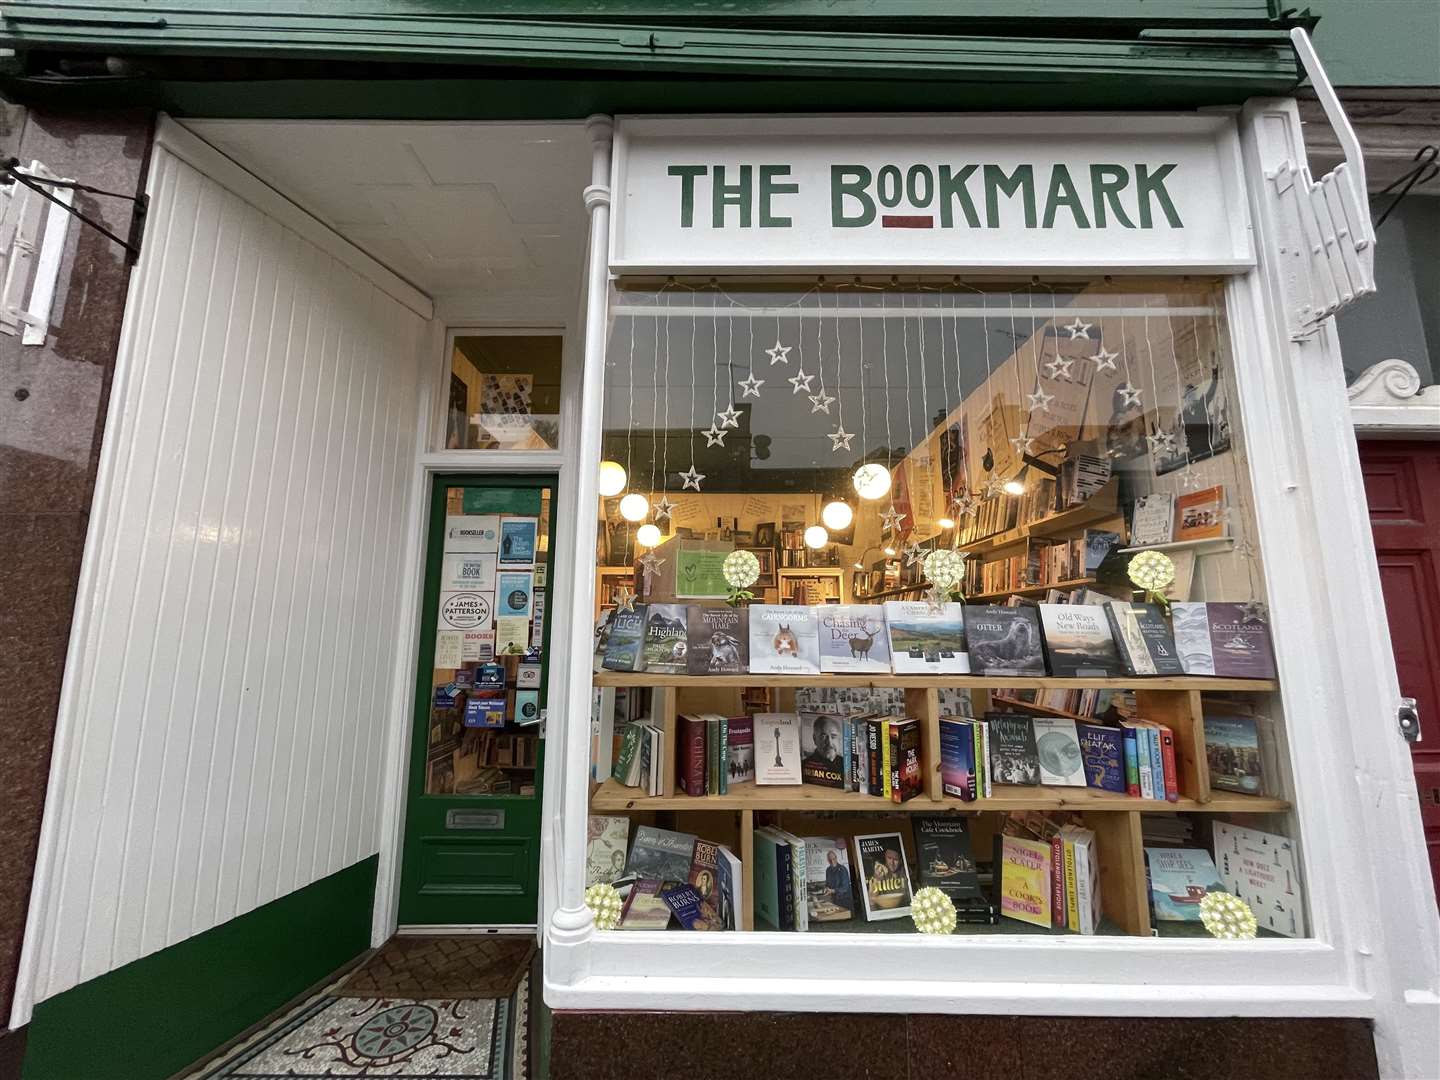 Grantown's finest bookshop - and the country's?